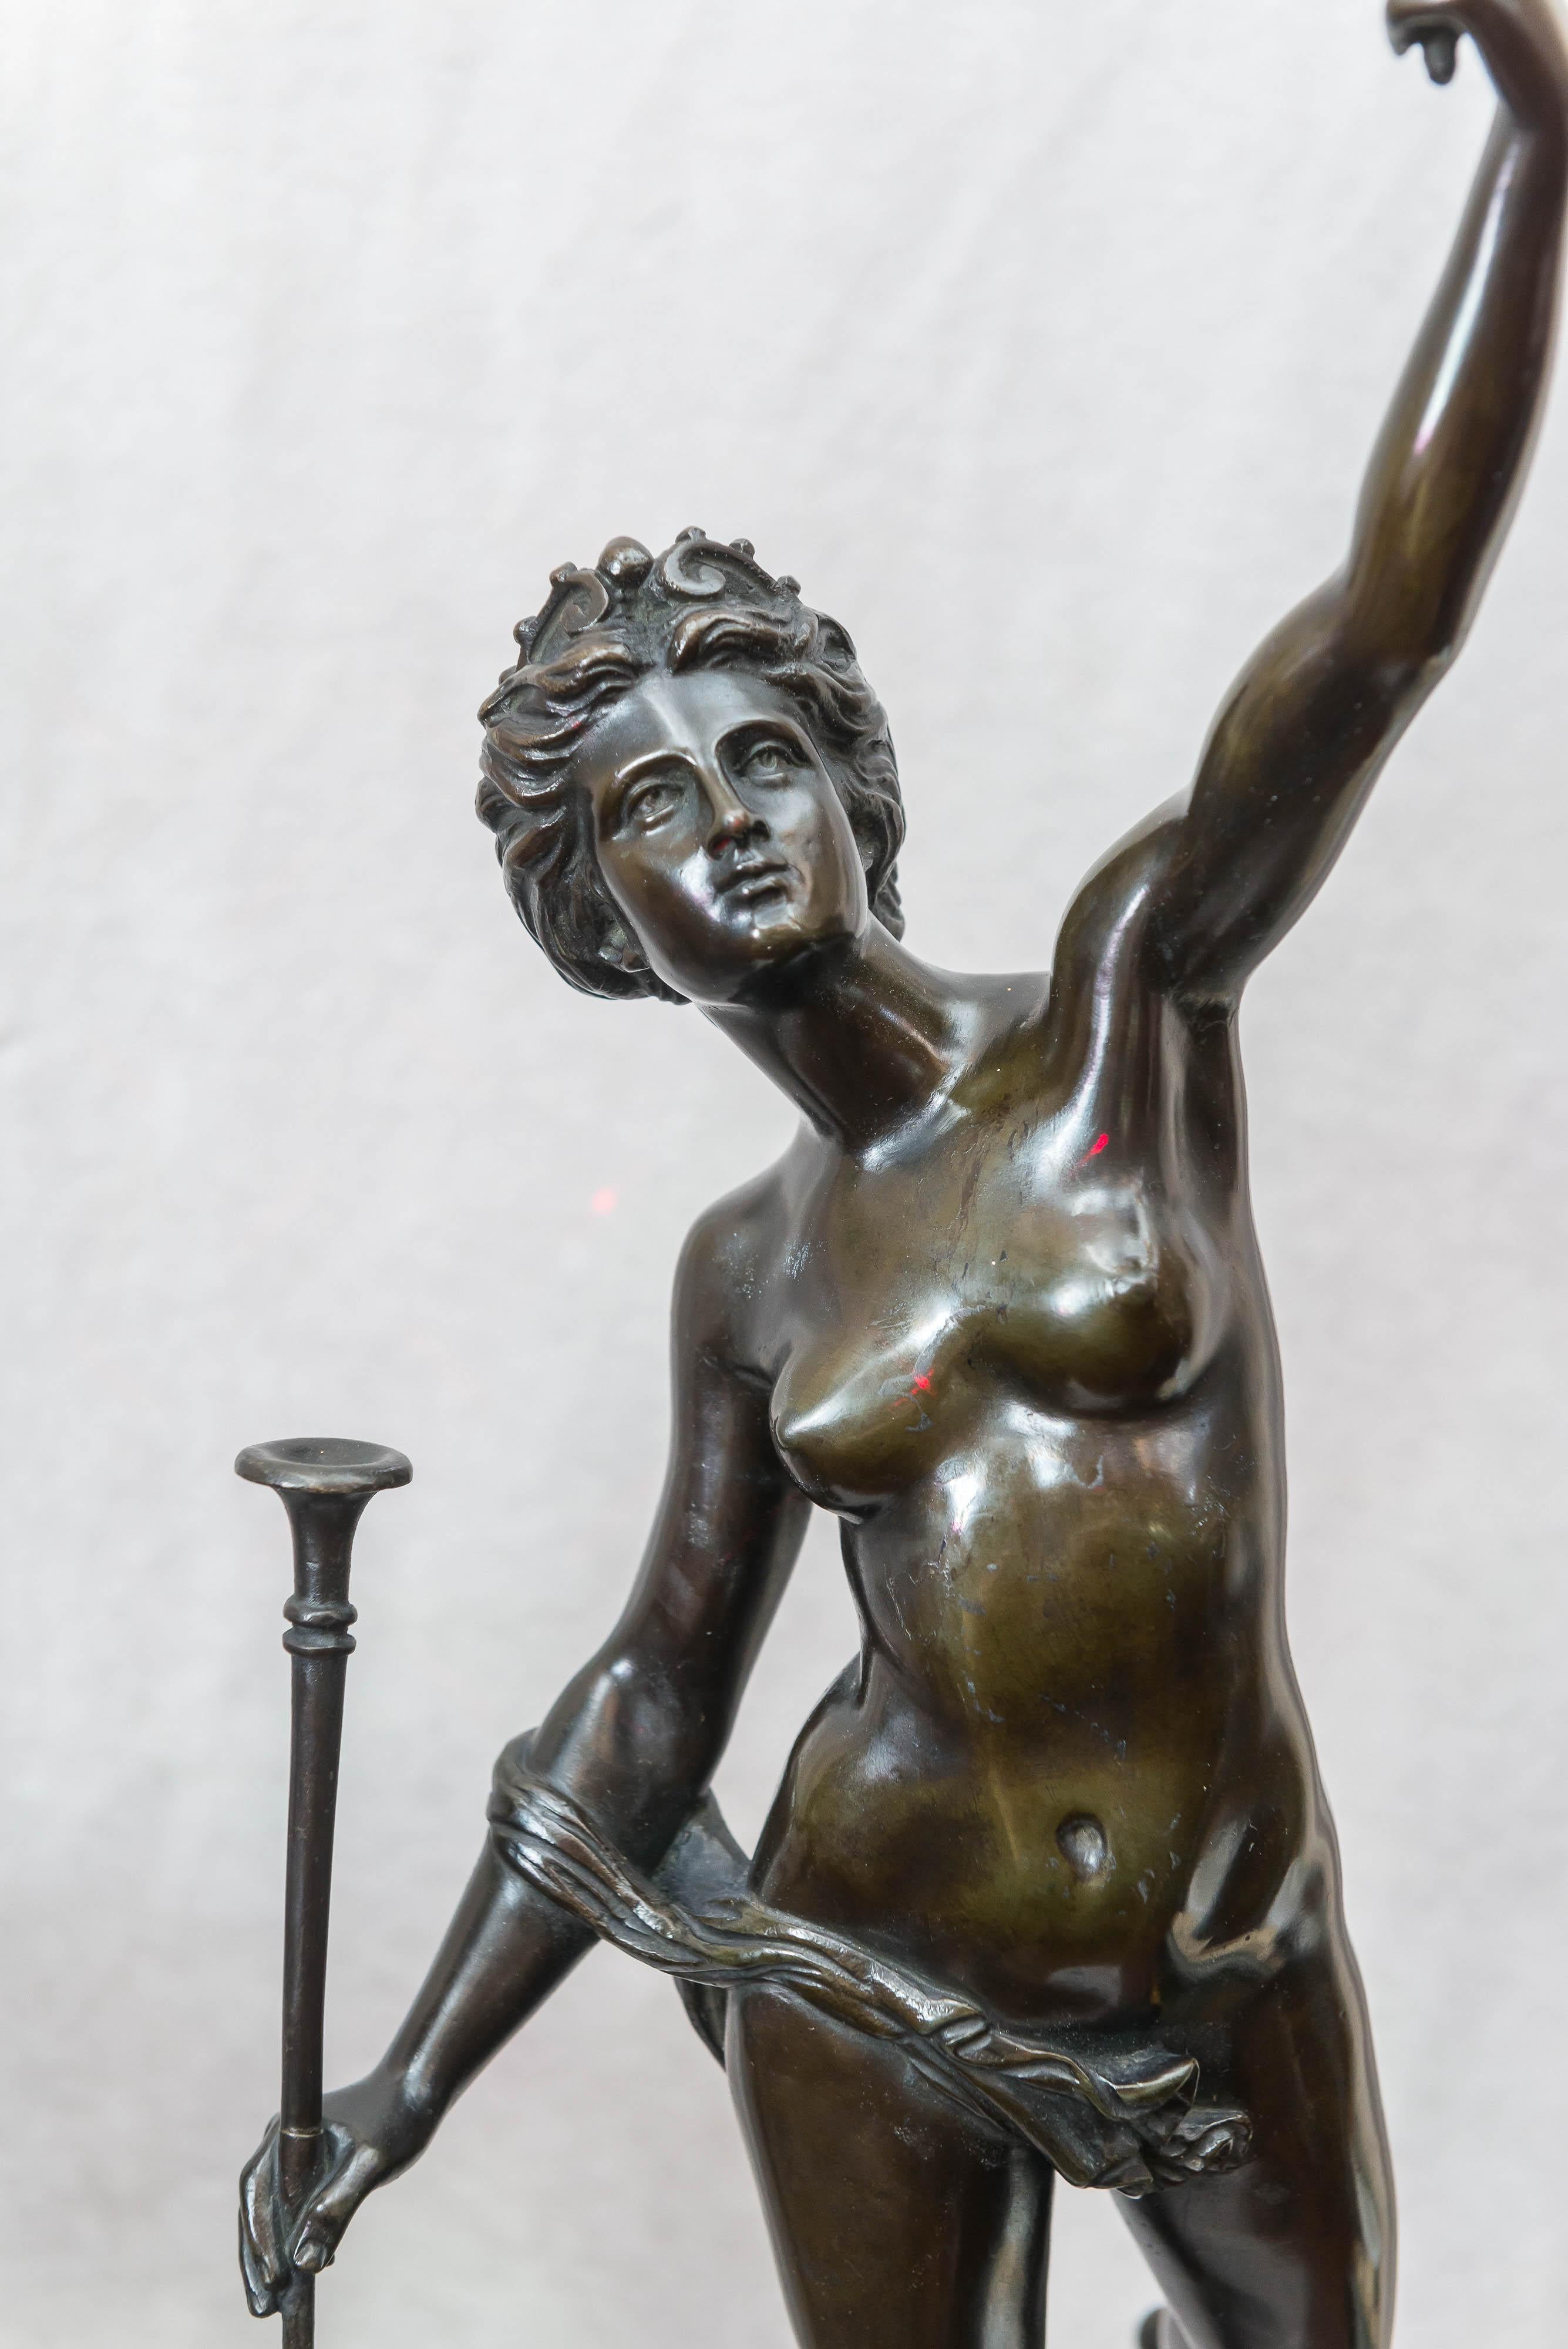 Here we have a finely cast and richly patinated example of Mercury and Fortuna. These can come in various sizes, ad at 36'' high, we have a larger pair than the usual. These were originally made by the artist Giambologna, and were done in the 16th